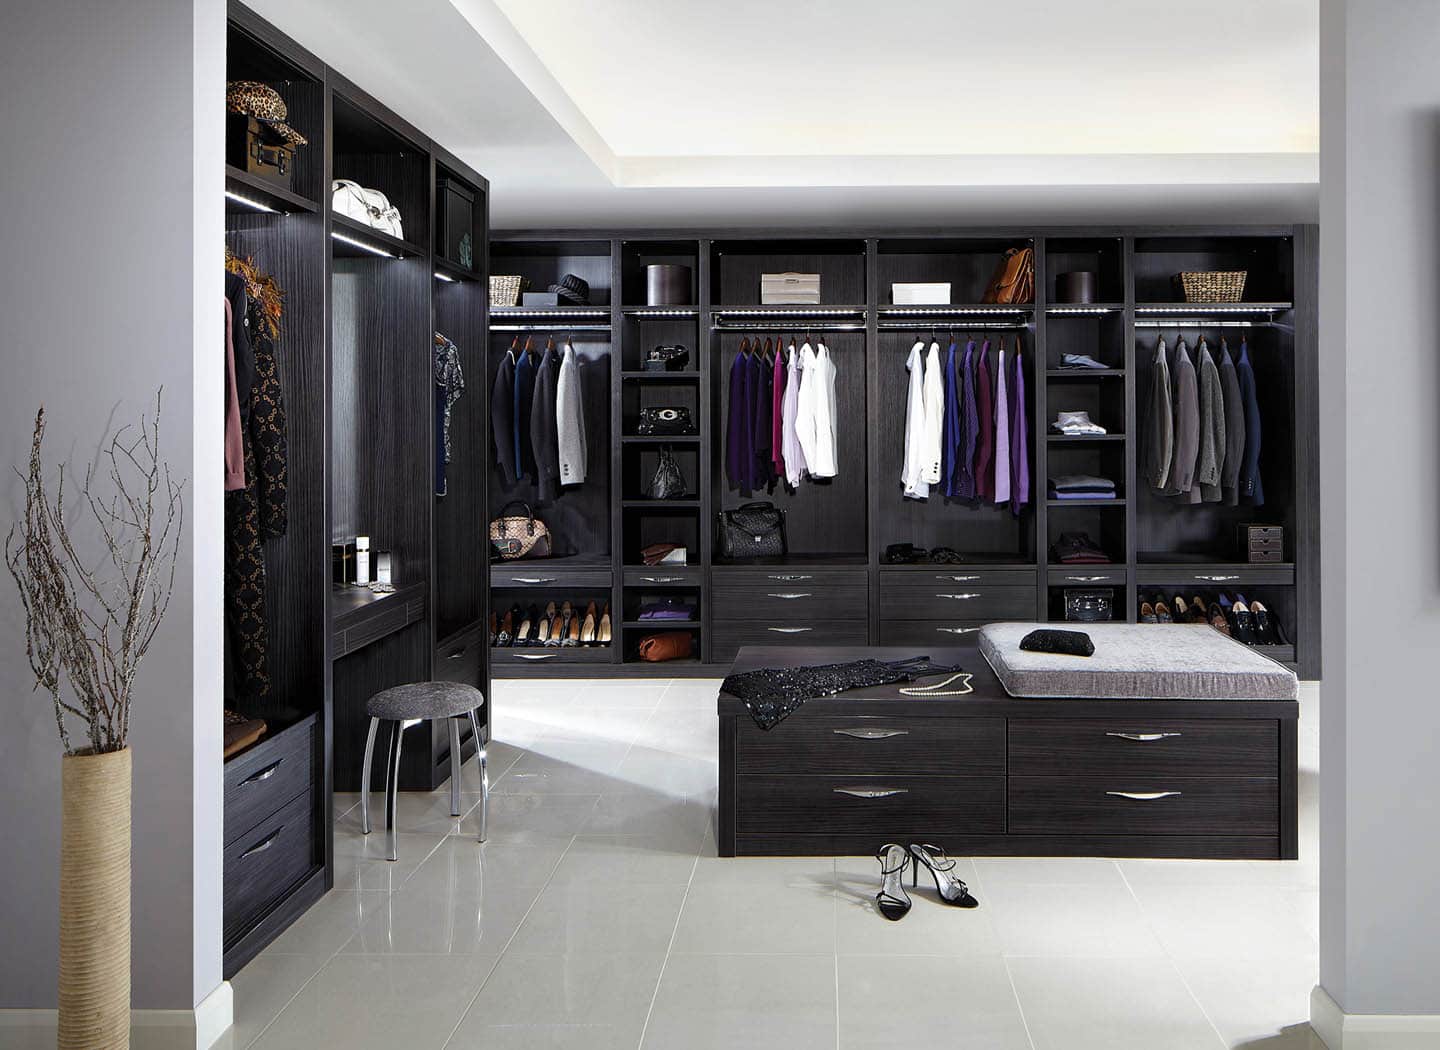 dressing room design pictures bespoke luxury fitted dressing rooms designs ...